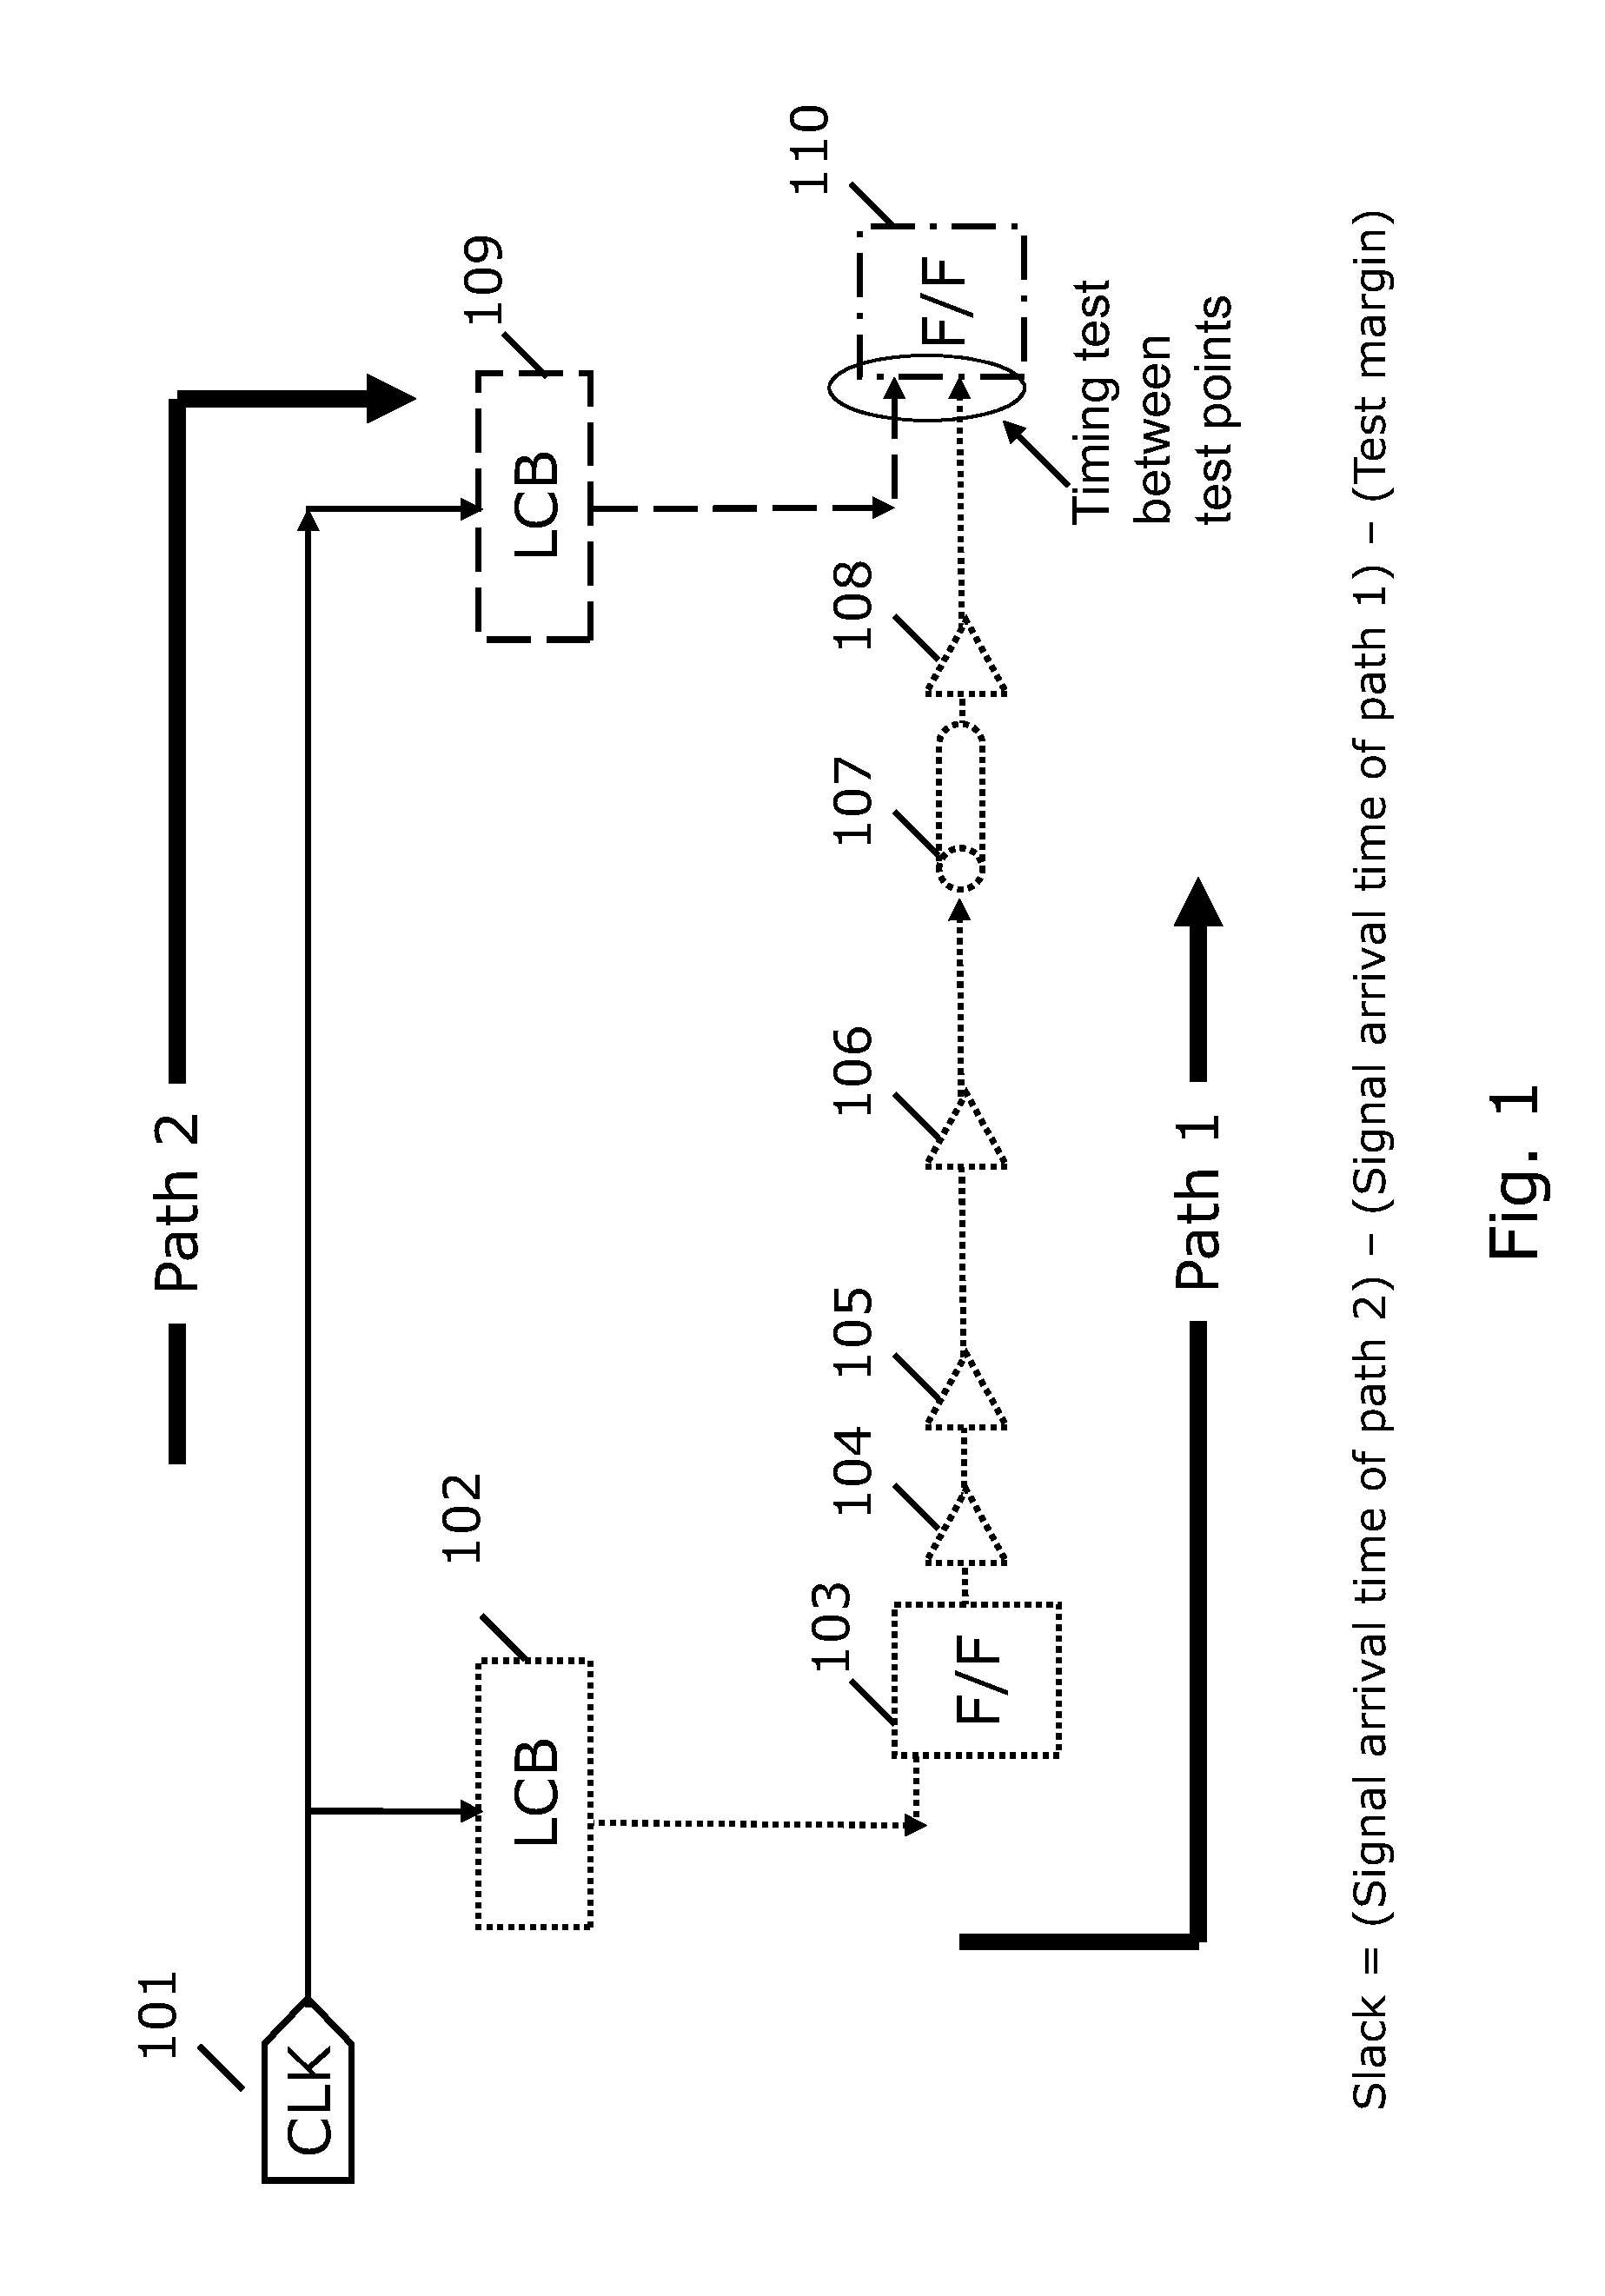 Corner specific normalization of static timing analysis